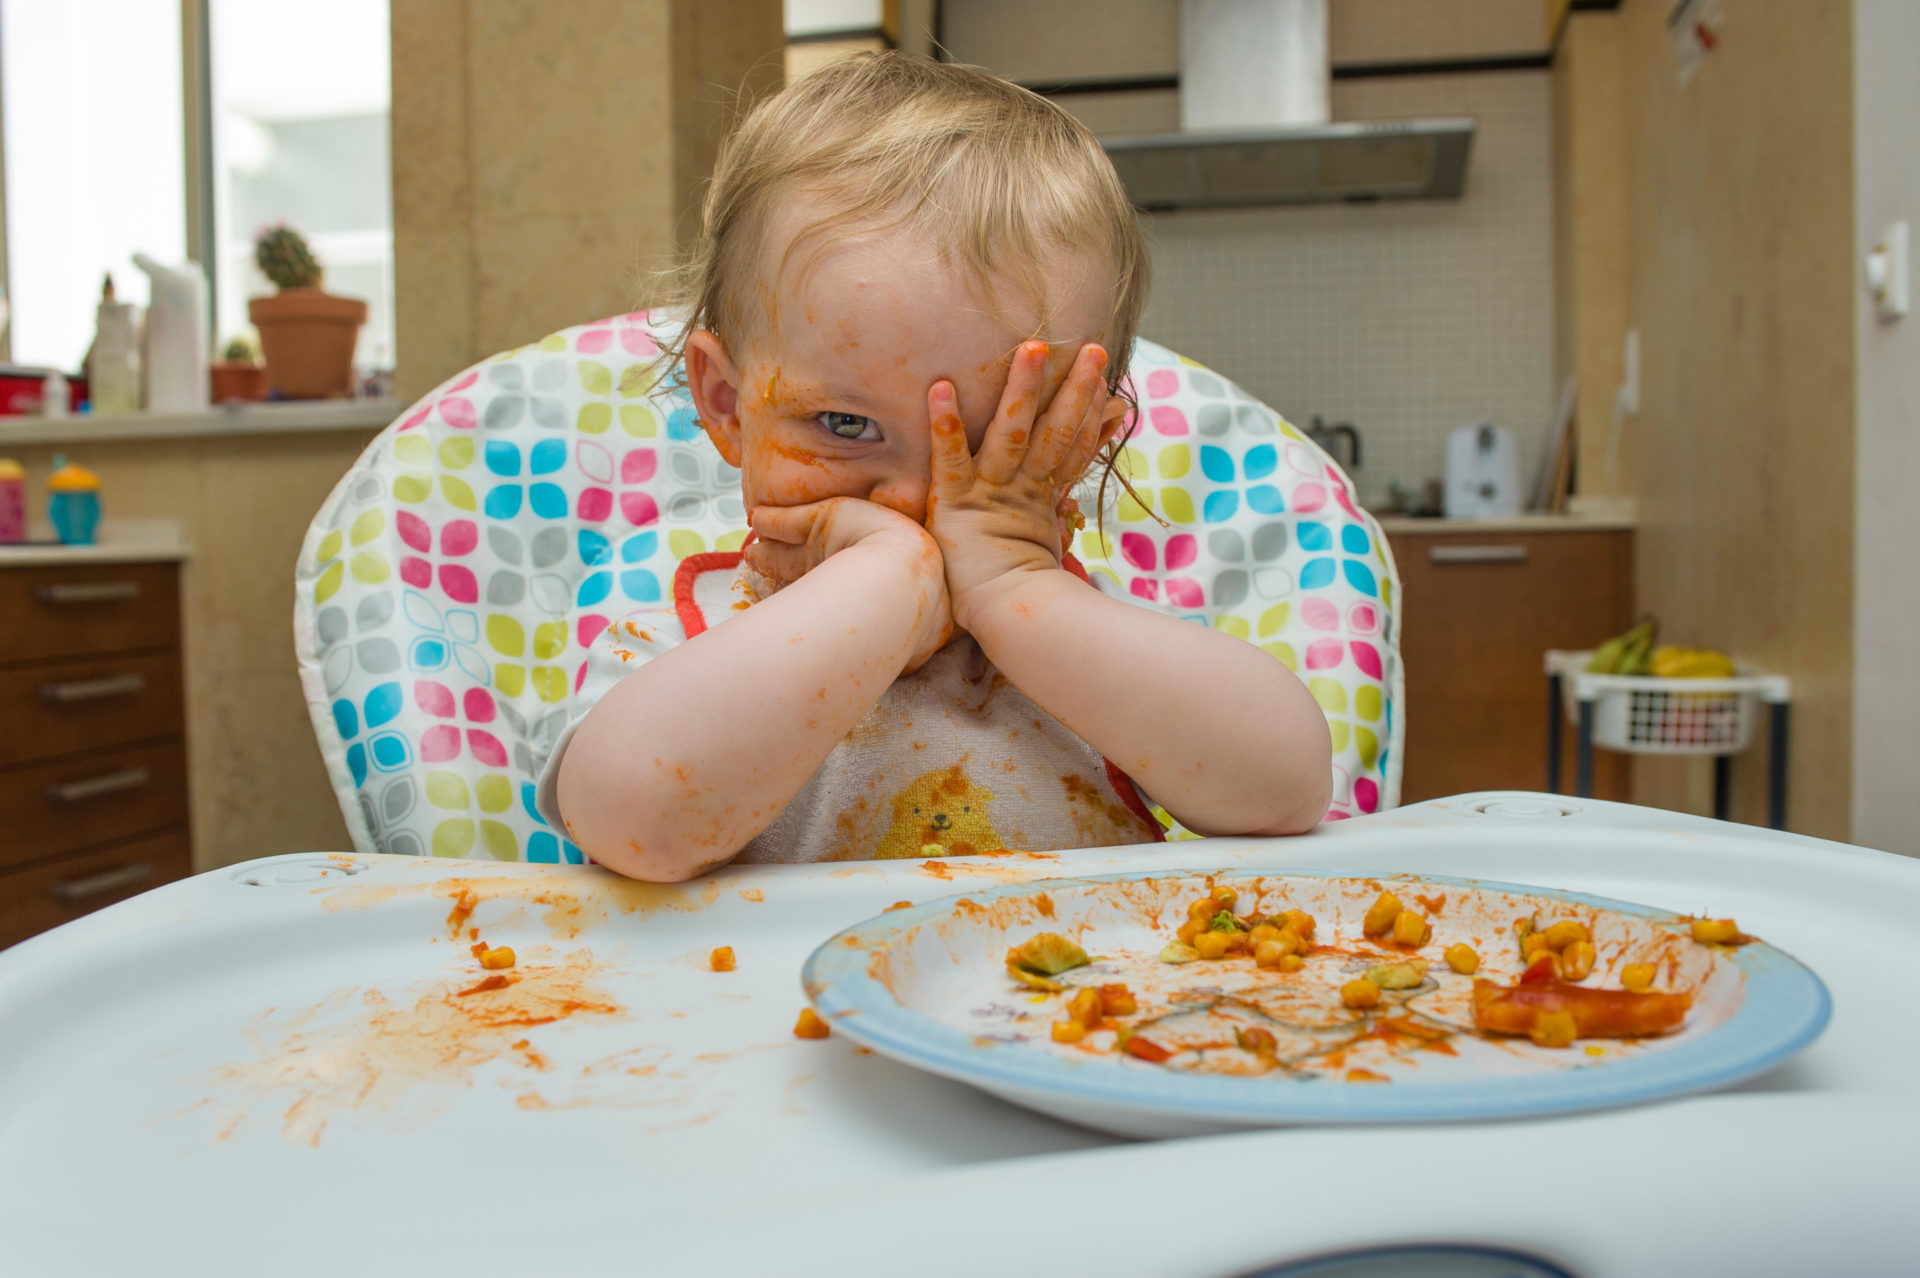 A baby girl (age 15 months) eats a meal of sweet corn and tomato sauce in a messy manner and plays with her food on a high chair